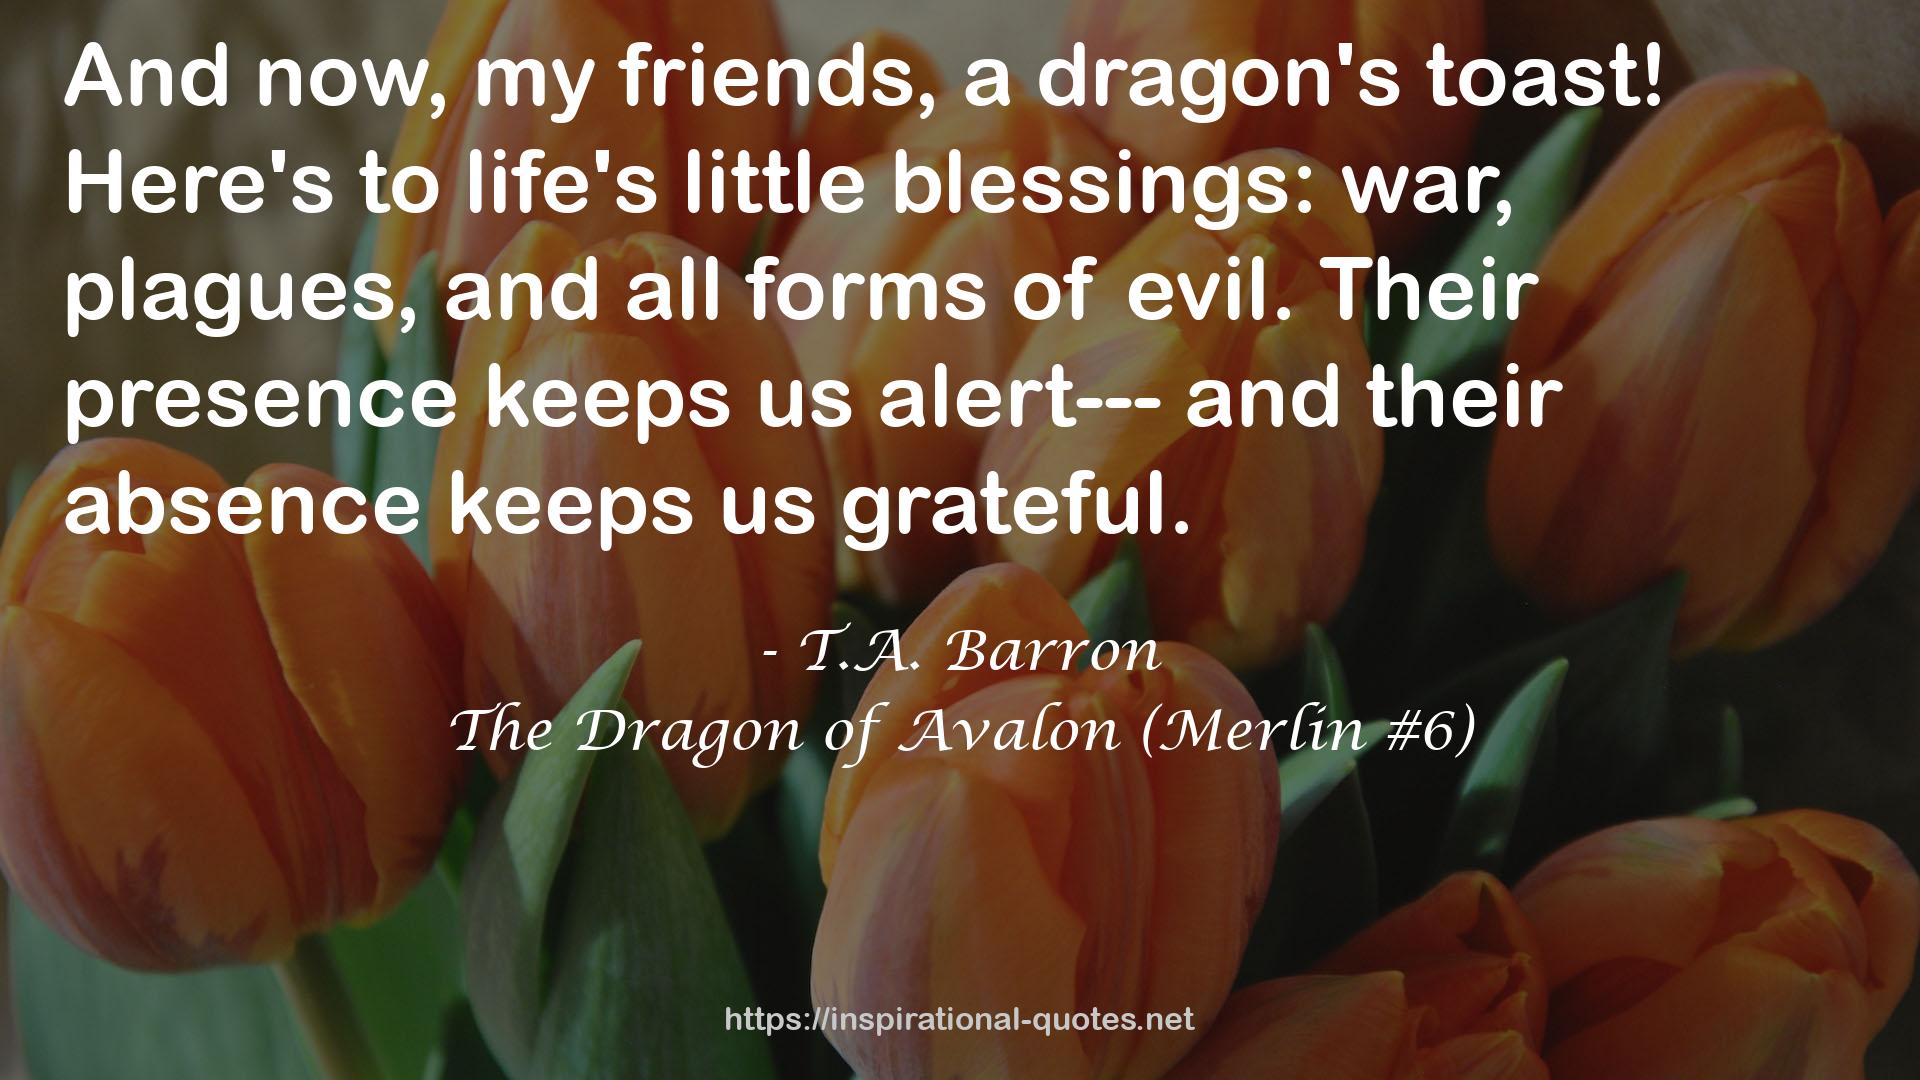 The Dragon of Avalon (Merlin #6) QUOTES